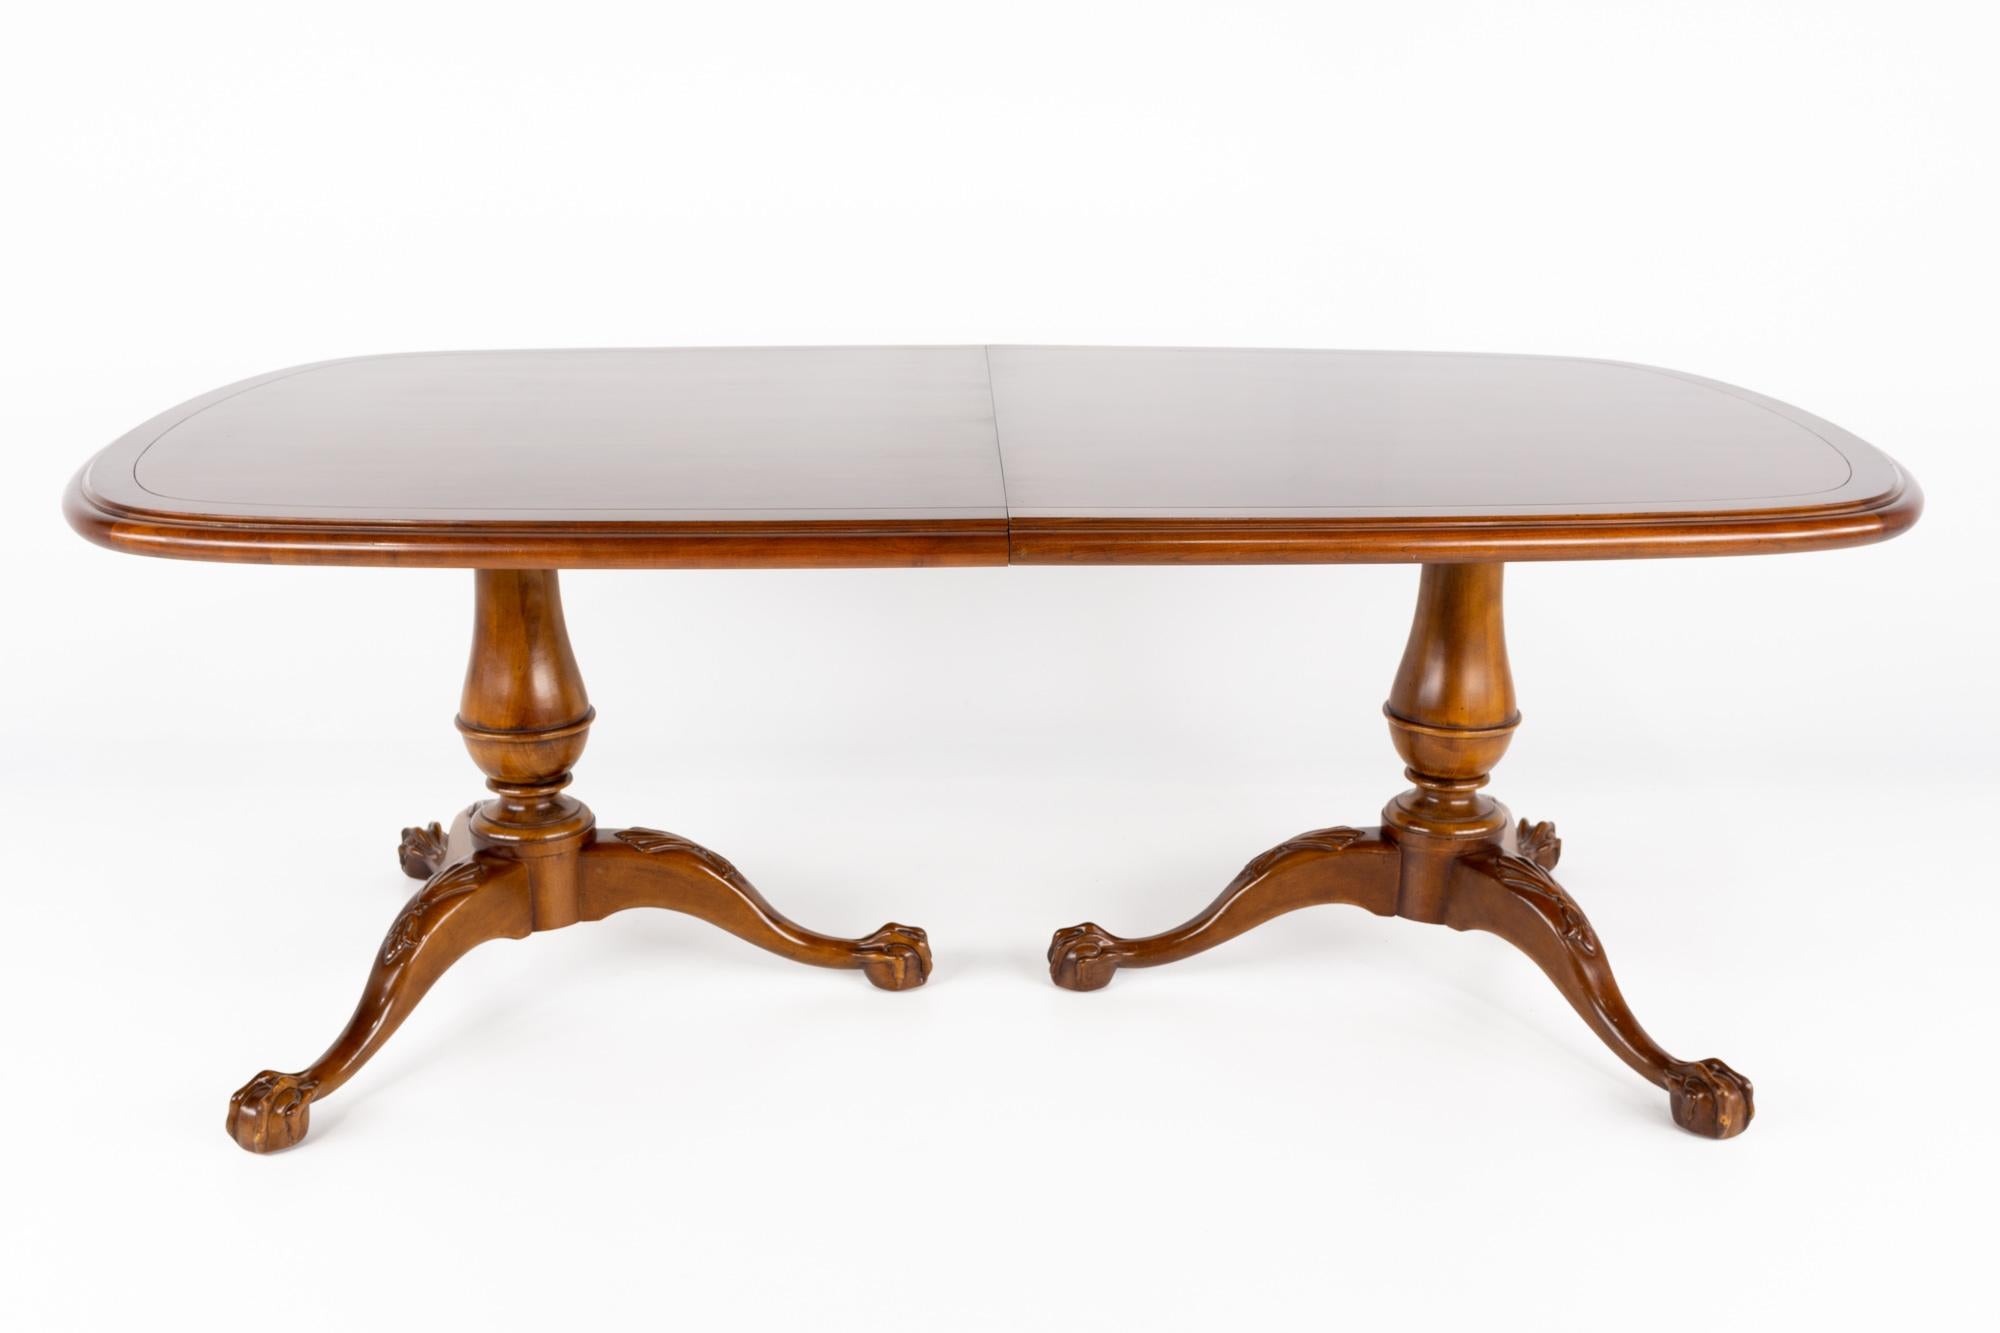 Century Furniture Traditional Clawfoot dining table with 2 leaves

This table measures: 82 wide x 46 deep x 30 high, with a chair clearance of 28 inches; each leaf is 20 inches wide, making a maximum table width of 122 inches when both leaves are